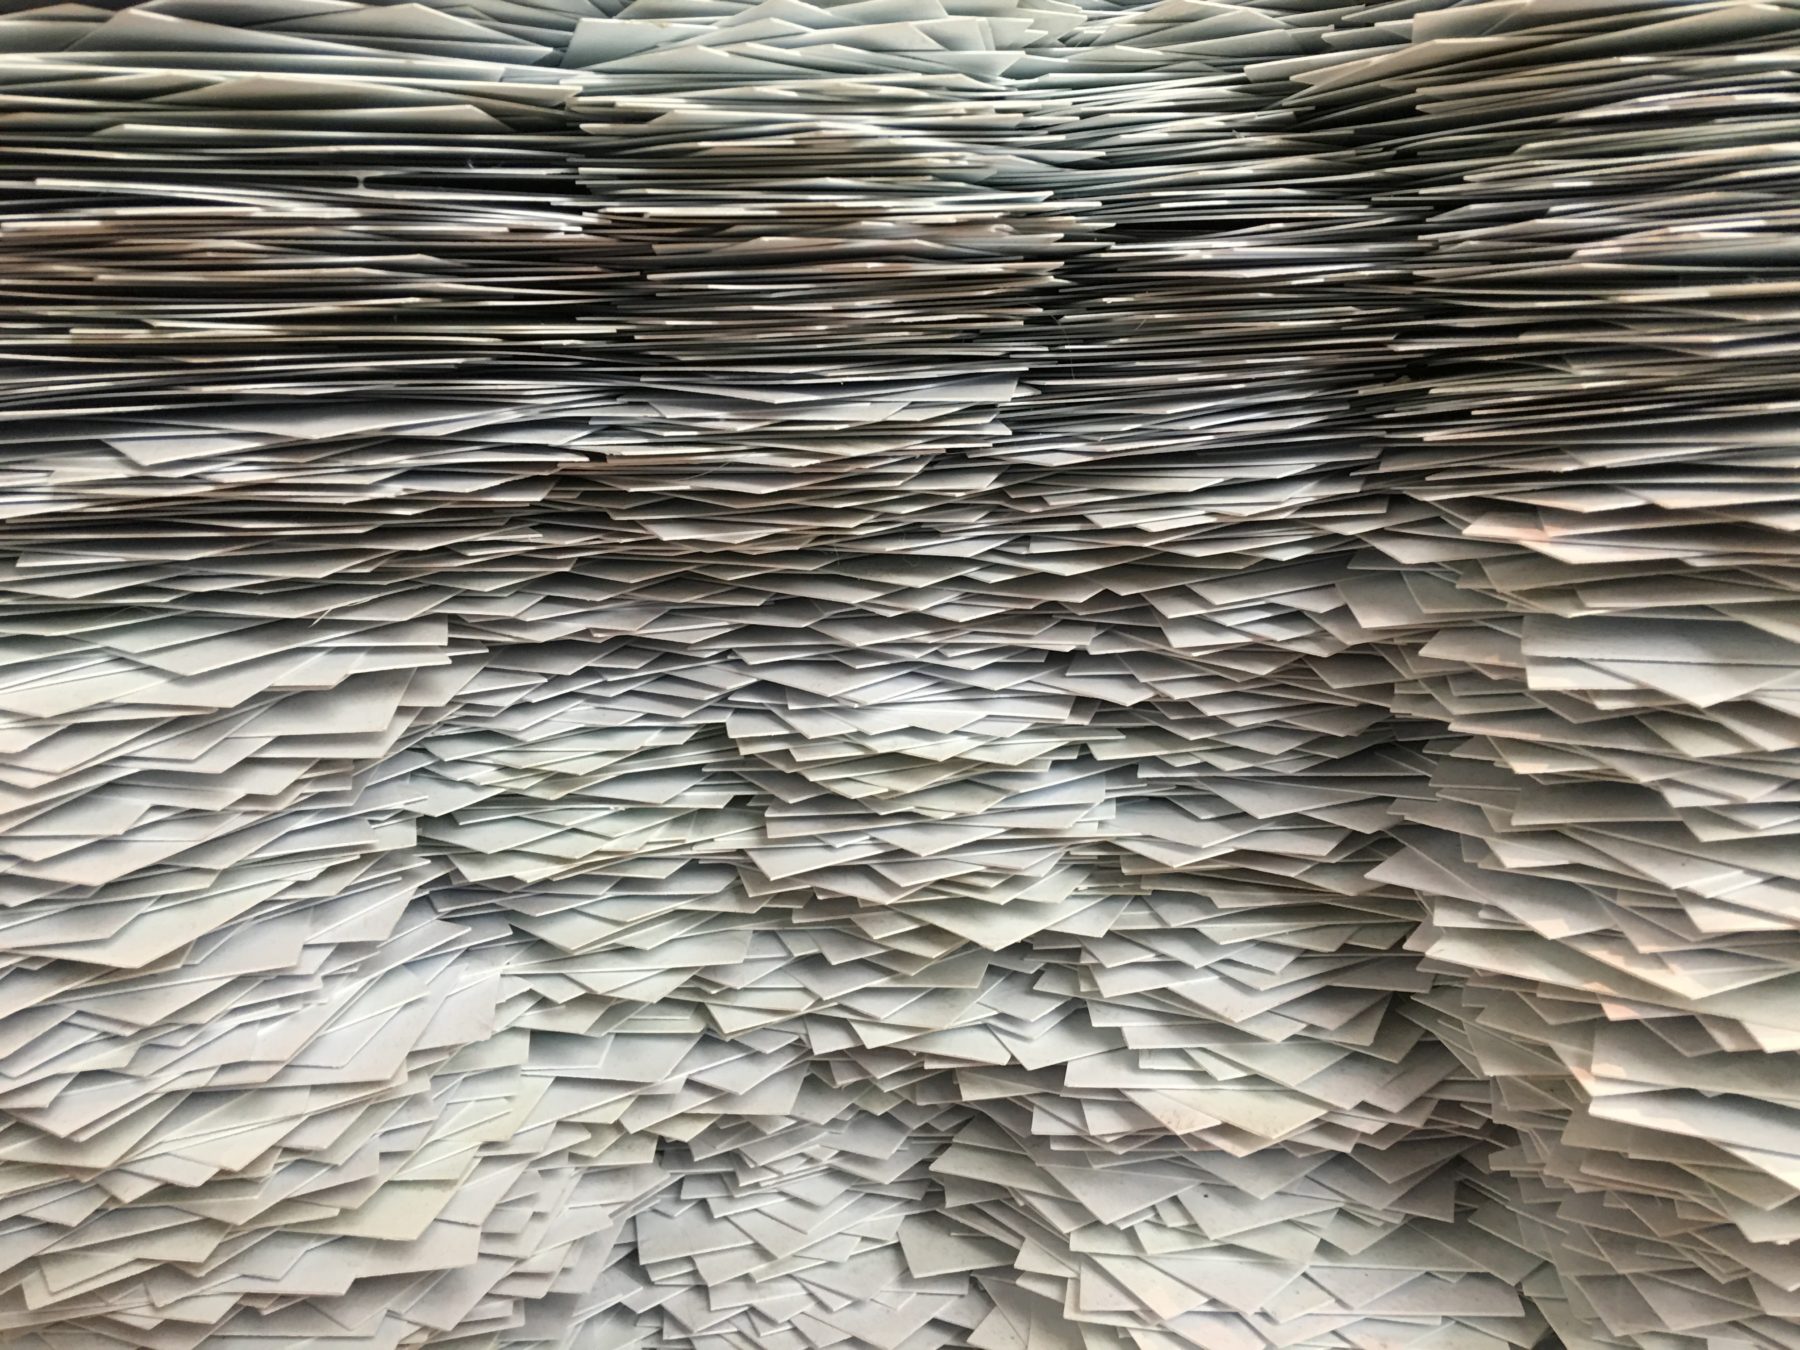 An exhibition in Washington DC displaying a mass stack of papers.